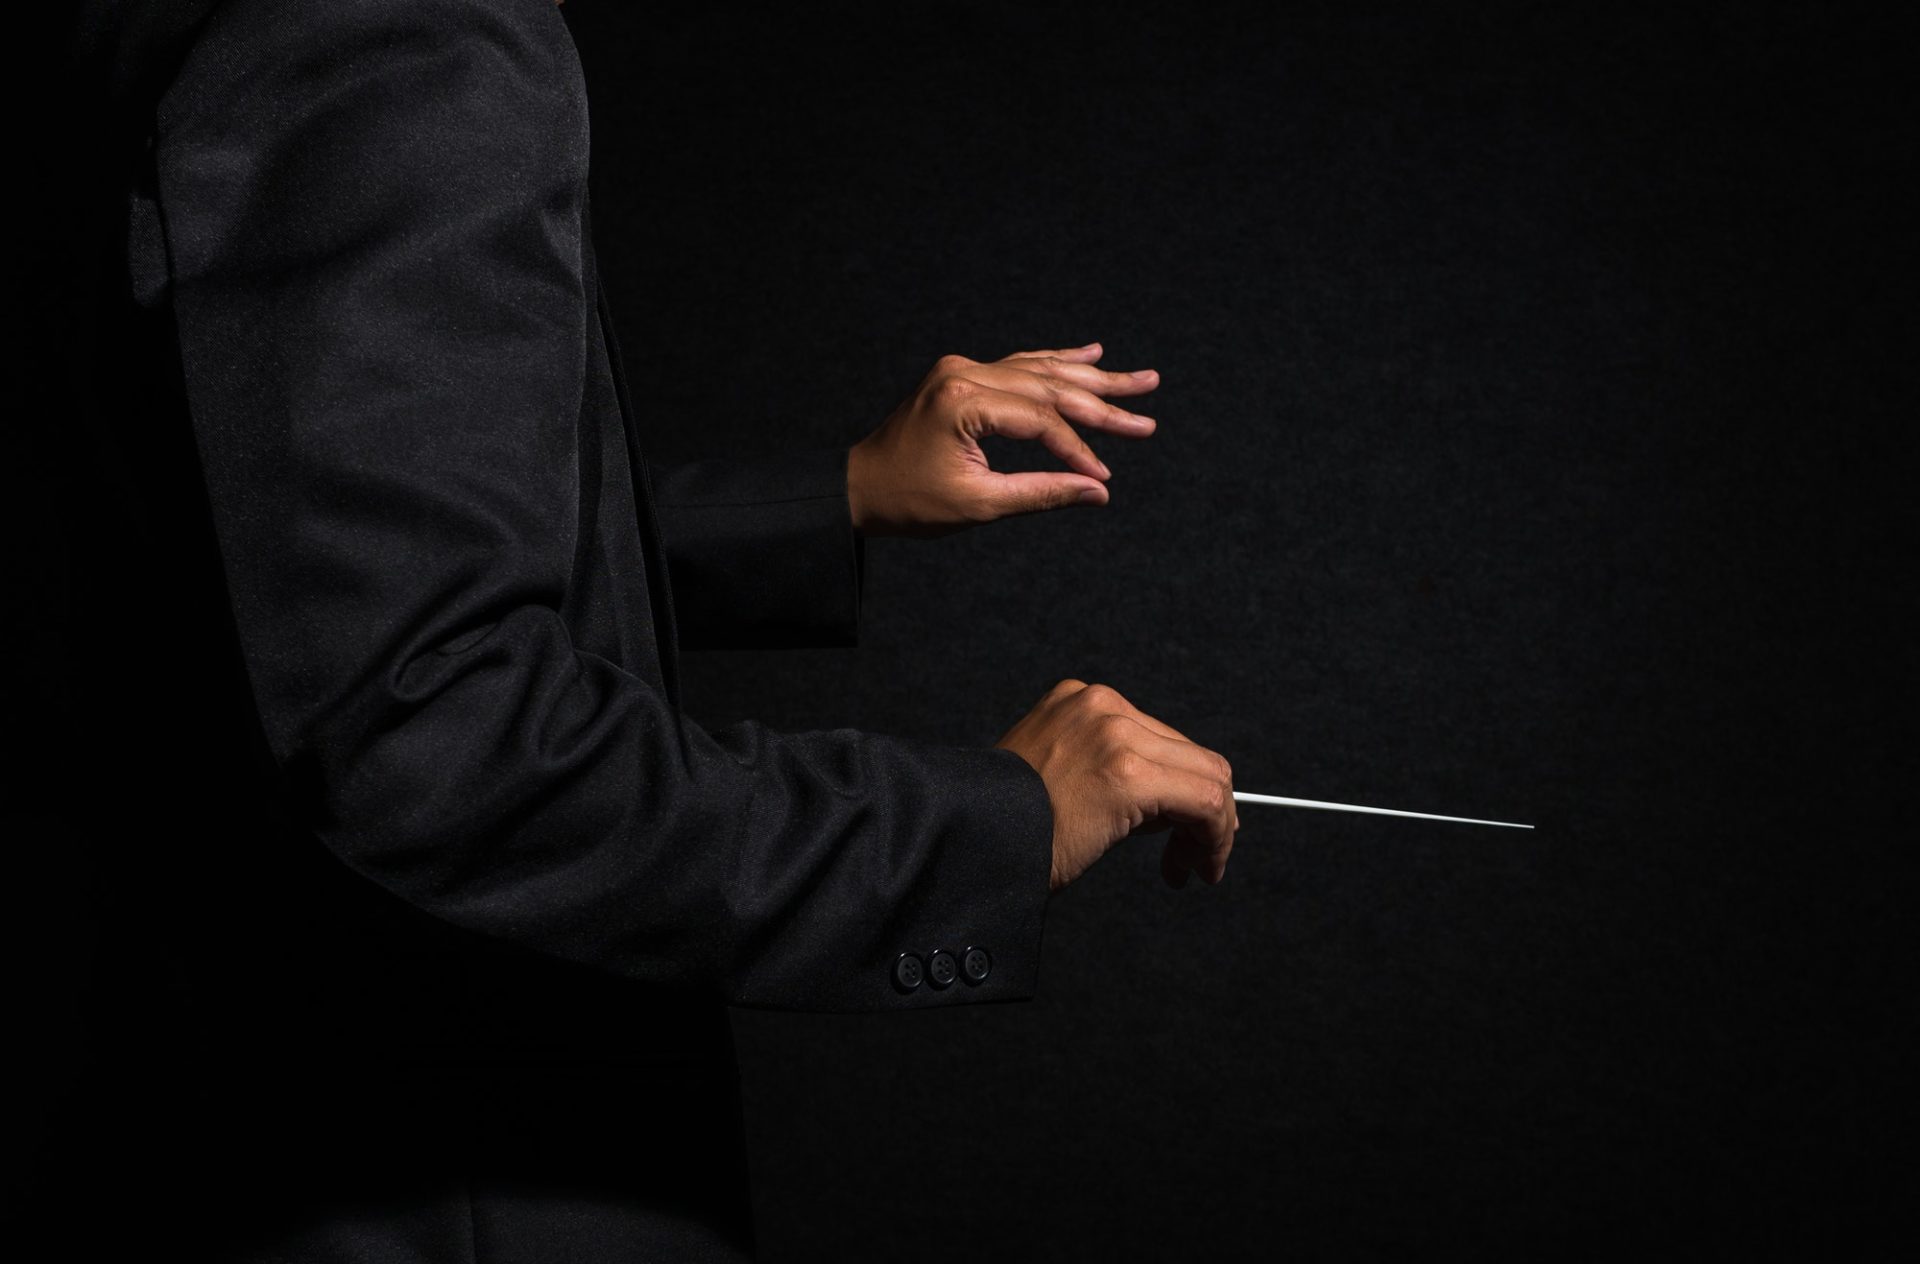 Orchestra conductor hands, Musician director holding stick on dark background